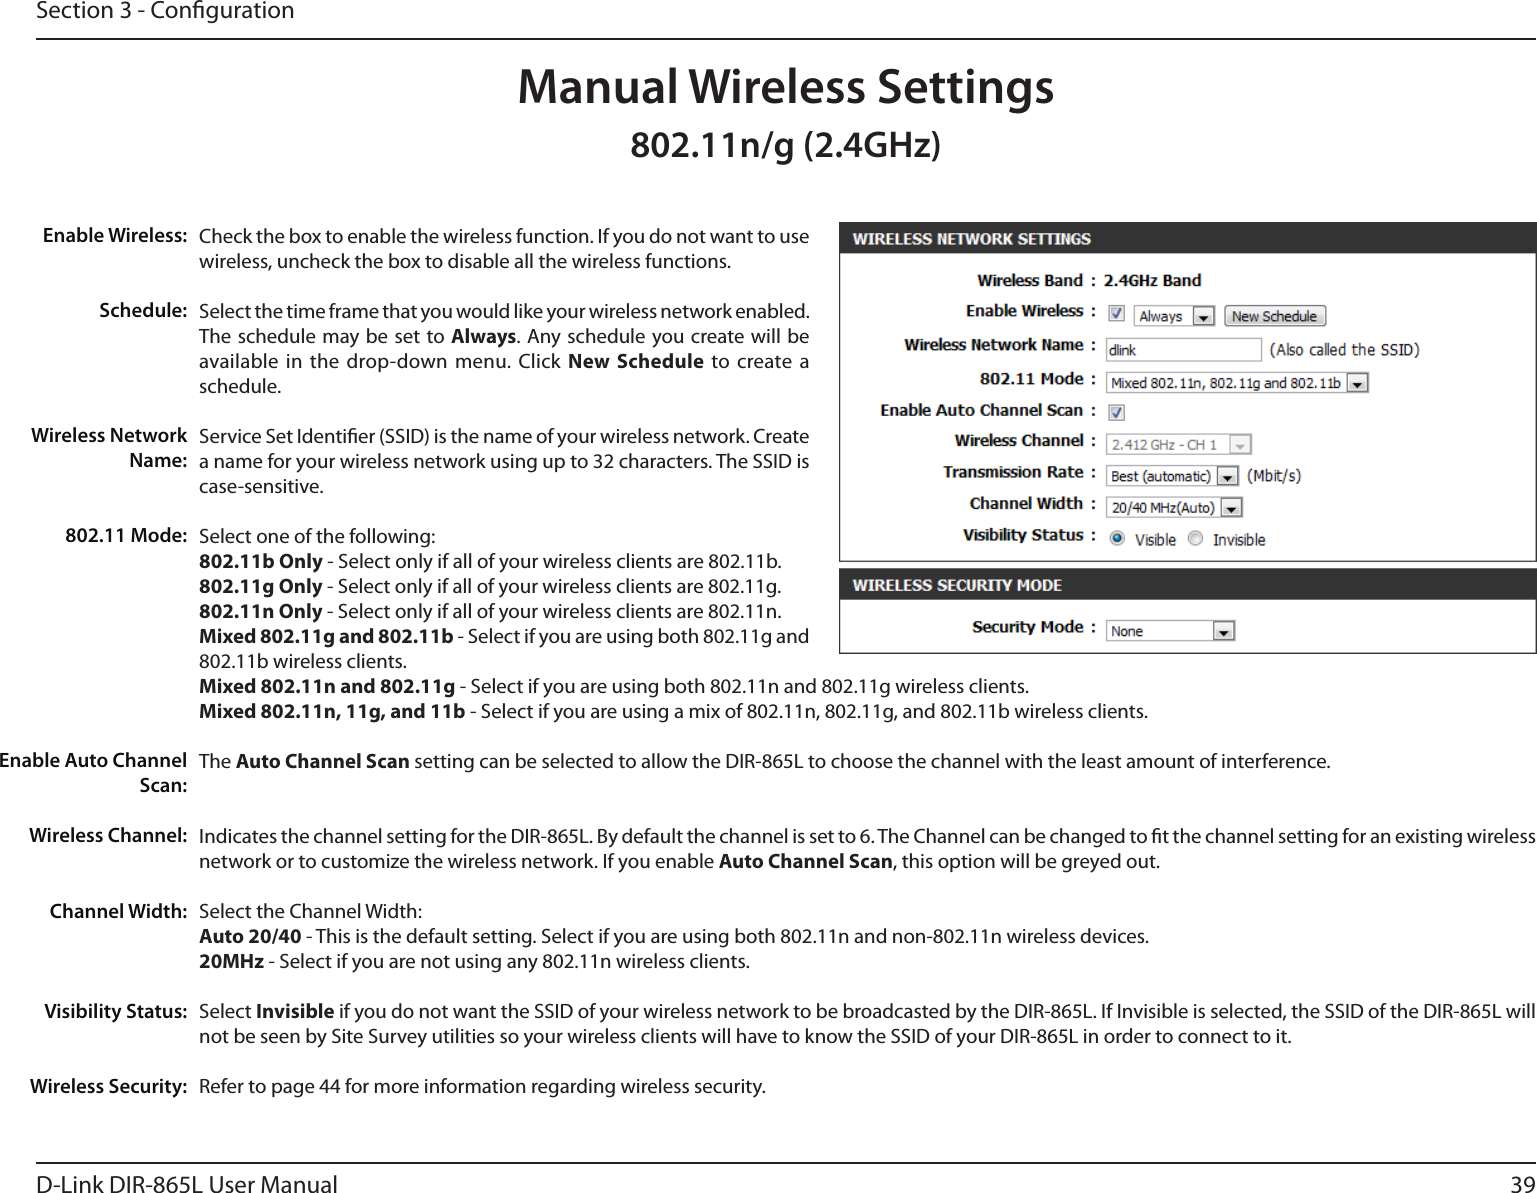 39D-Link DIR-865L User ManualSection 3 - CongurationCheck the box to enable the wireless function. If you do not want to use wireless, uncheck the box to disable all the wireless functions.Select the time frame that you would like your wireless network enabled. The schedule may be set to Always. Any schedule you create will be available in  the  drop-down menu. Click  New  Schedule  to  create  a schedule.Service Set Identier (SSID) is the name of your wireless network. Create a name for your wireless network using up to 32 characters. The SSID is case-sensitive.Select one of the following:802.11b Only - Select only if all of your wireless clients are 802.11b.802.11g Only - Select only if all of your wireless clients are 802.11g.802.11n Only - Select only if all of your wireless clients are 802.11n.Mixed 802.11g and 802.11b - Select if you are using both 802.11g and 802.11b wireless clients.Mixed 802.11n and 802.11g - Select if you are using both 802.11n and 802.11g wireless clients.Mixed 802.11n, 11g, and 11b - Select if you are using a mix of 802.11n, 802.11g, and 802.11b wireless clients.The Auto Channel Scan setting can be selected to allow the DIR-865L to choose the channel with the least amount of interference.Indicates the channel setting for the DIR-865L. By default the channel is set to 6. The Channel can be changed to t the channel setting for an existing wireless network or to customize the wireless network. If you enable Auto Channel Scan, this option will be greyed out.Select the Channel Width:Auto 20/40 - This is the default setting. Select if you are using both 802.11n and non-802.11n wireless devices.20MHz - Select if you are not using any 802.11n wireless clients.Select Invisible if you do not want the SSID of your wireless network to be broadcasted by the DIR-865L. If Invisible is selected, the SSID of the DIR-865L will not be seen by Site Survey utilities so your wireless clients will have to know the SSID of your DIR-865L in order to connect to it.Refer to page 44 for more information regarding wireless security.Enable Wireless:Schedule:Wireless Network Name:802.11 Mode:Enable Auto Channel Scan:Wireless Channel:Manual Wireless SettingsChannel Width:Visibility Status:Wireless Security:802.11n/g (2.4GHz)